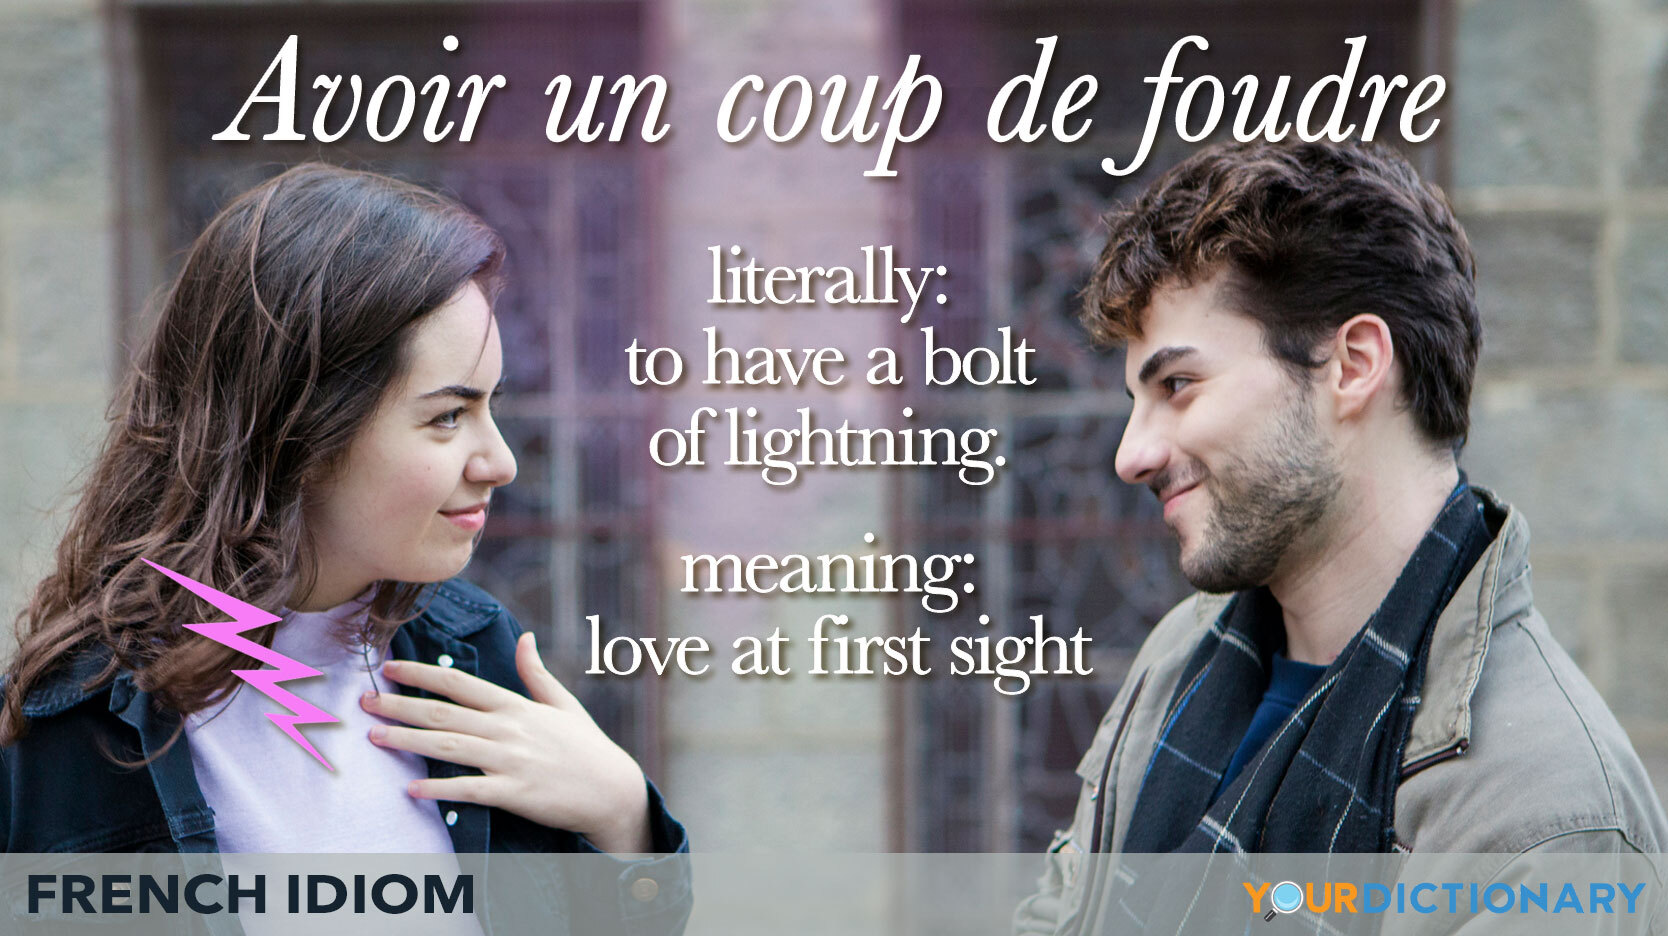 french idiom of love at first sight